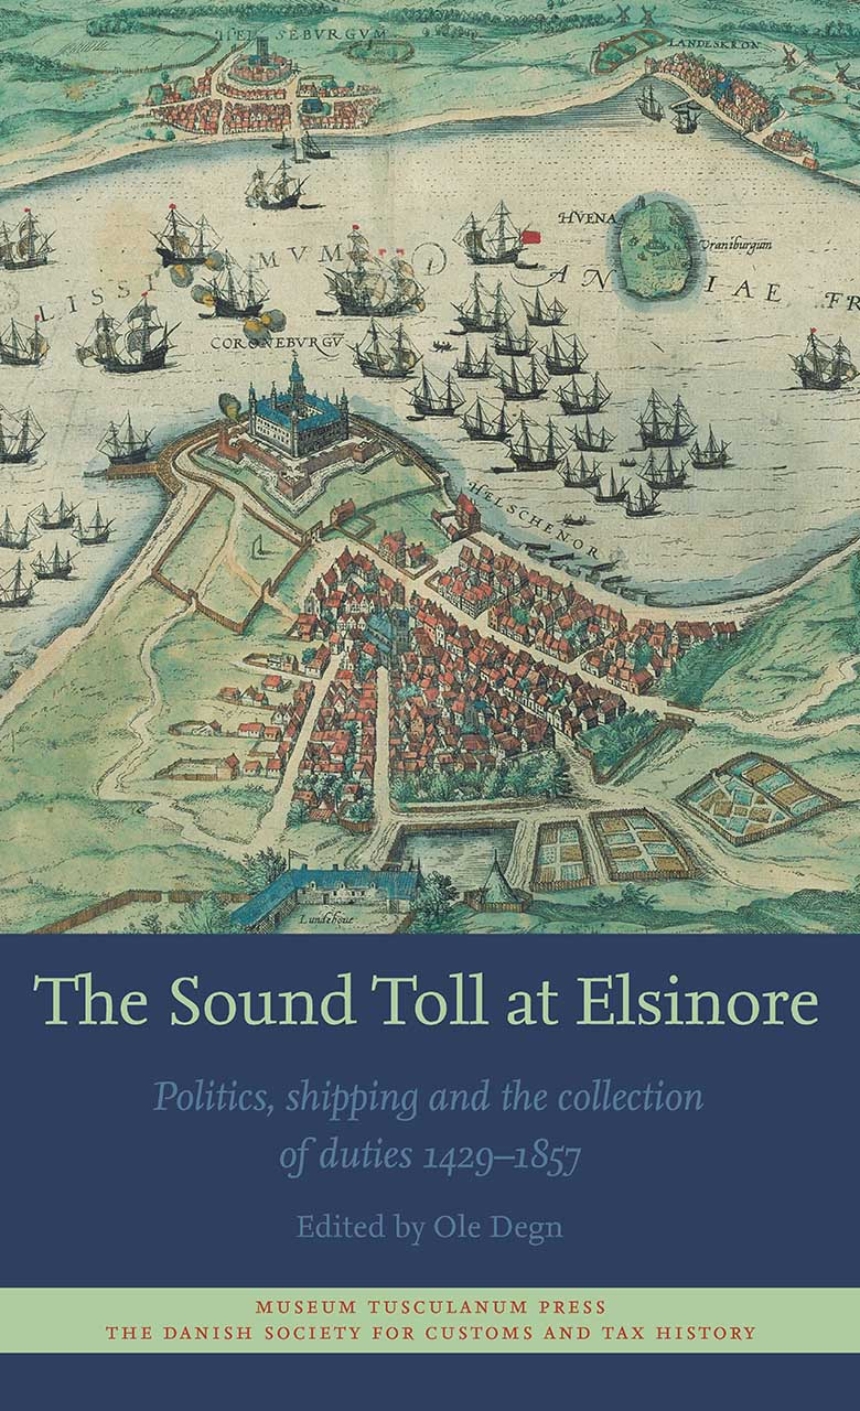 The Sound Toll at Elsinore